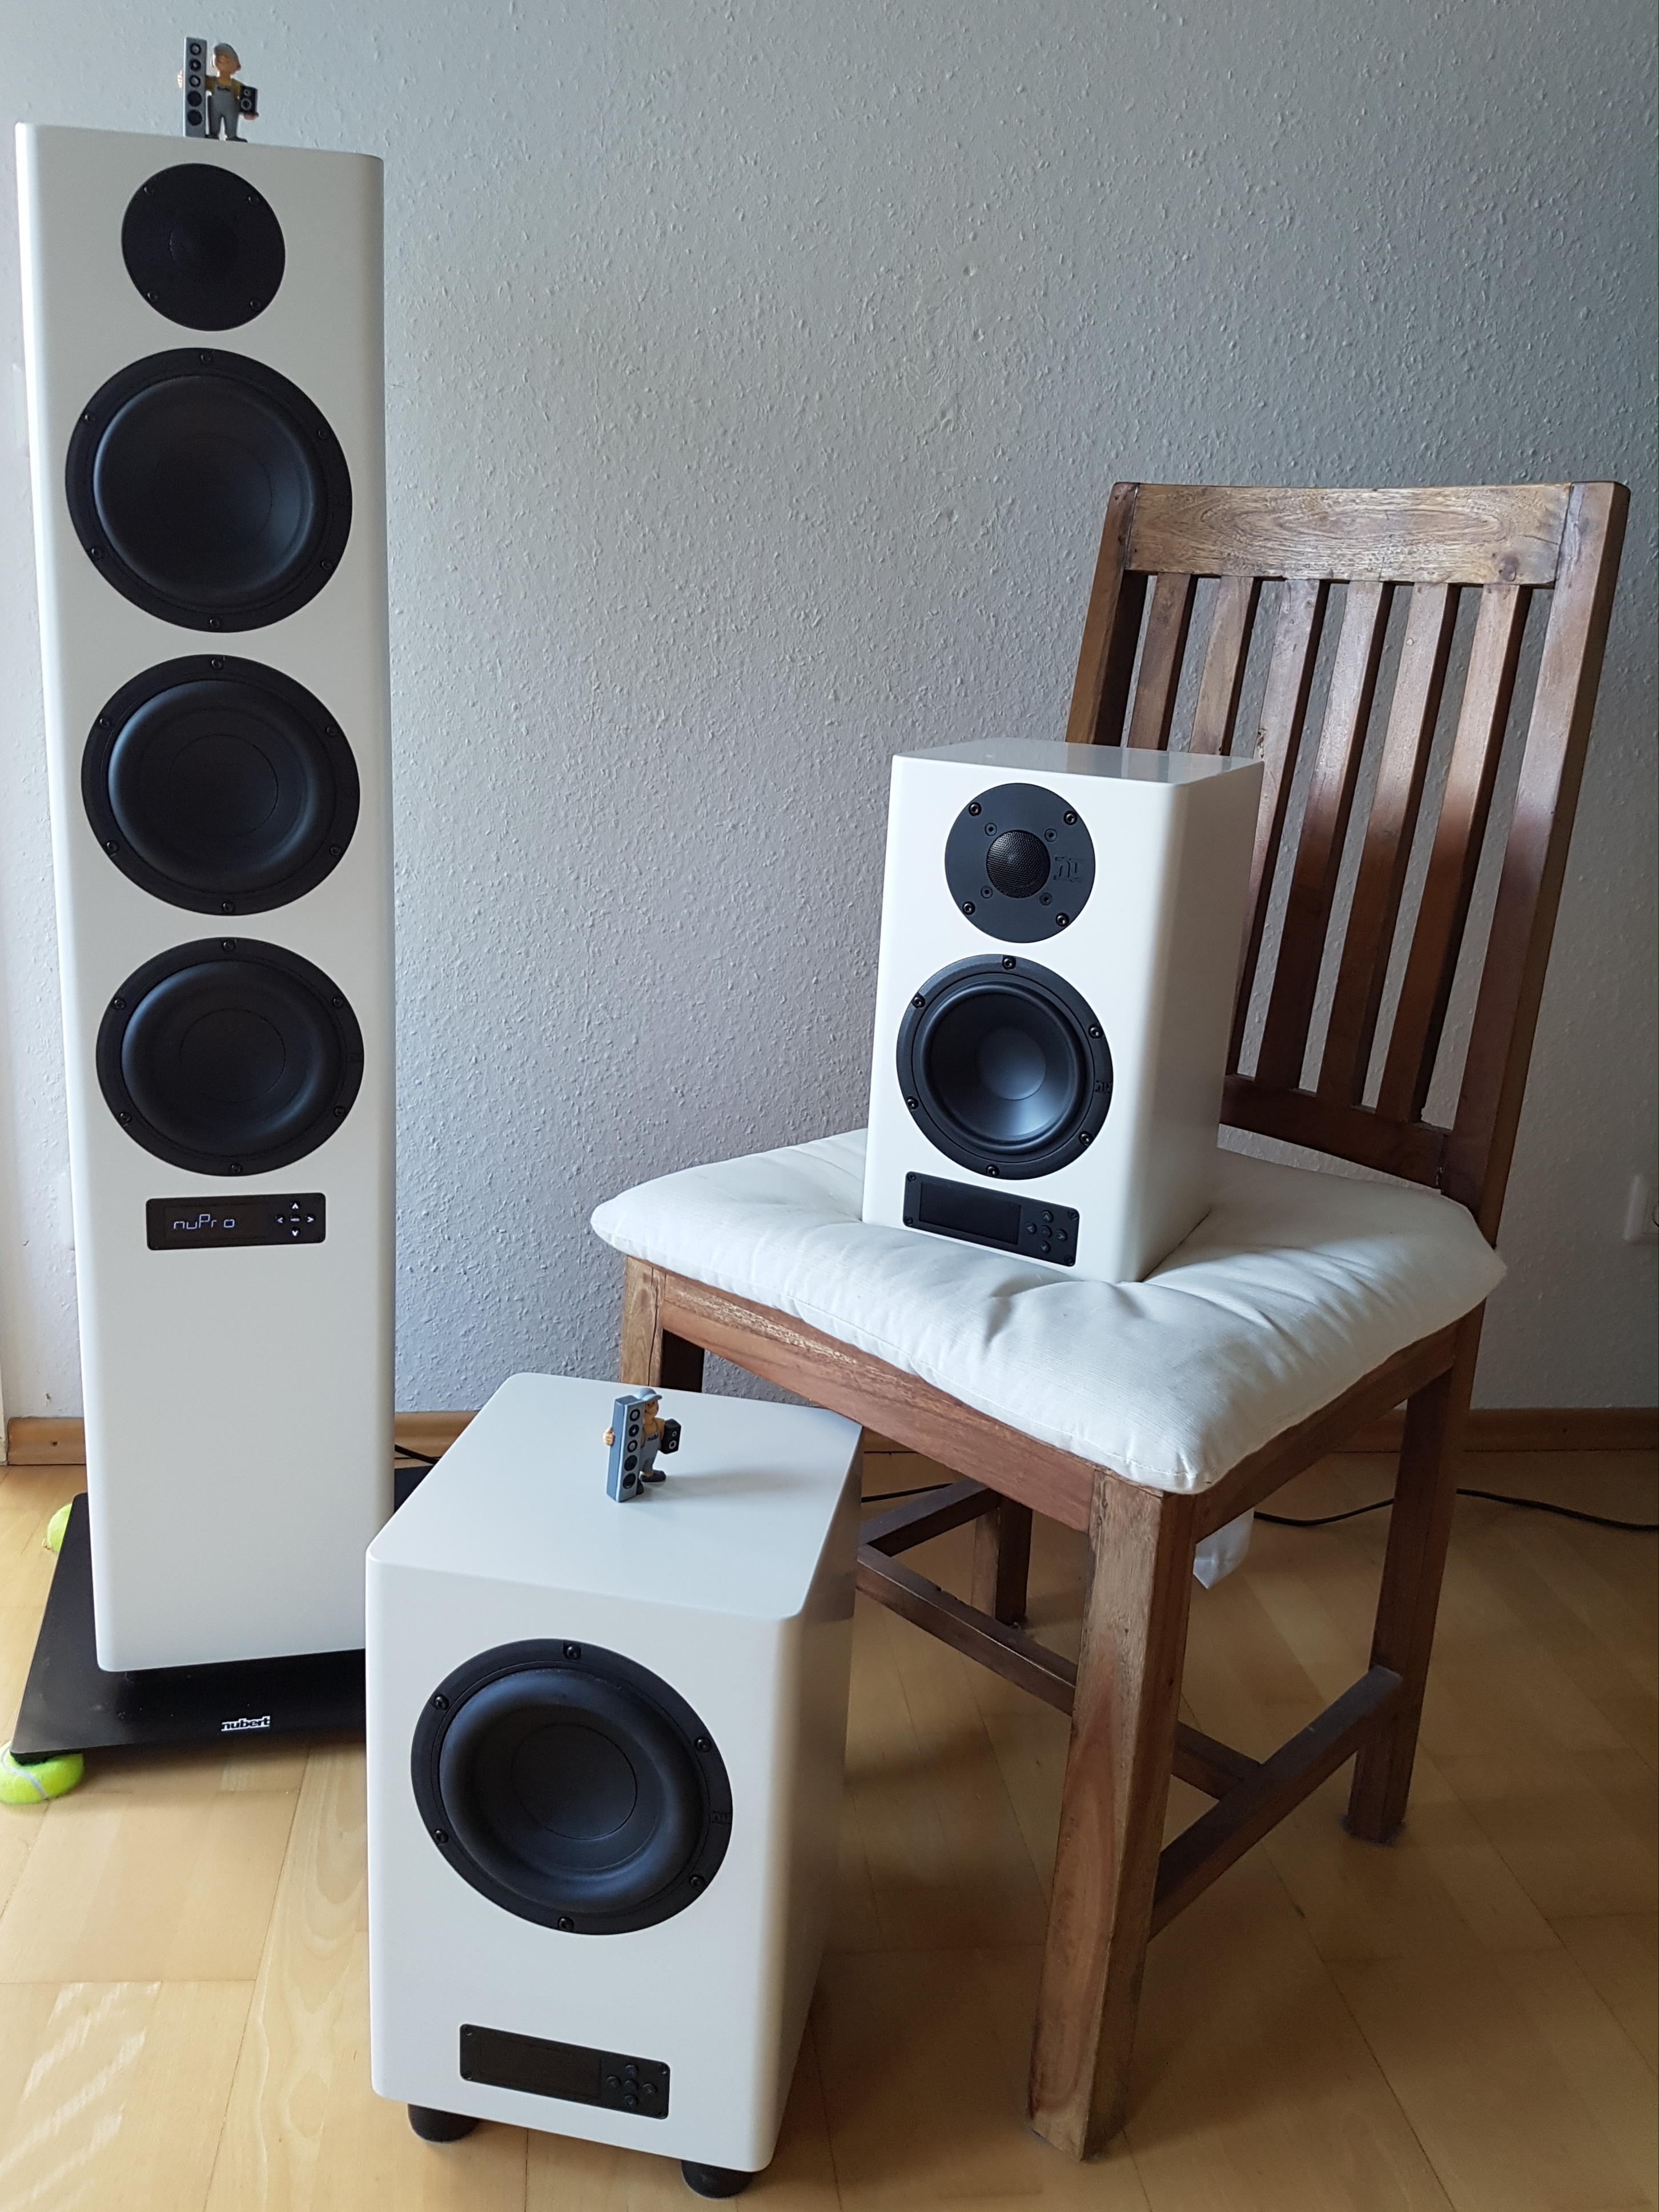 File:Nubert NuPro Aktivboxen A-700, A200 und Subwoofer AW-350.jpg -  Wikimedia Commons